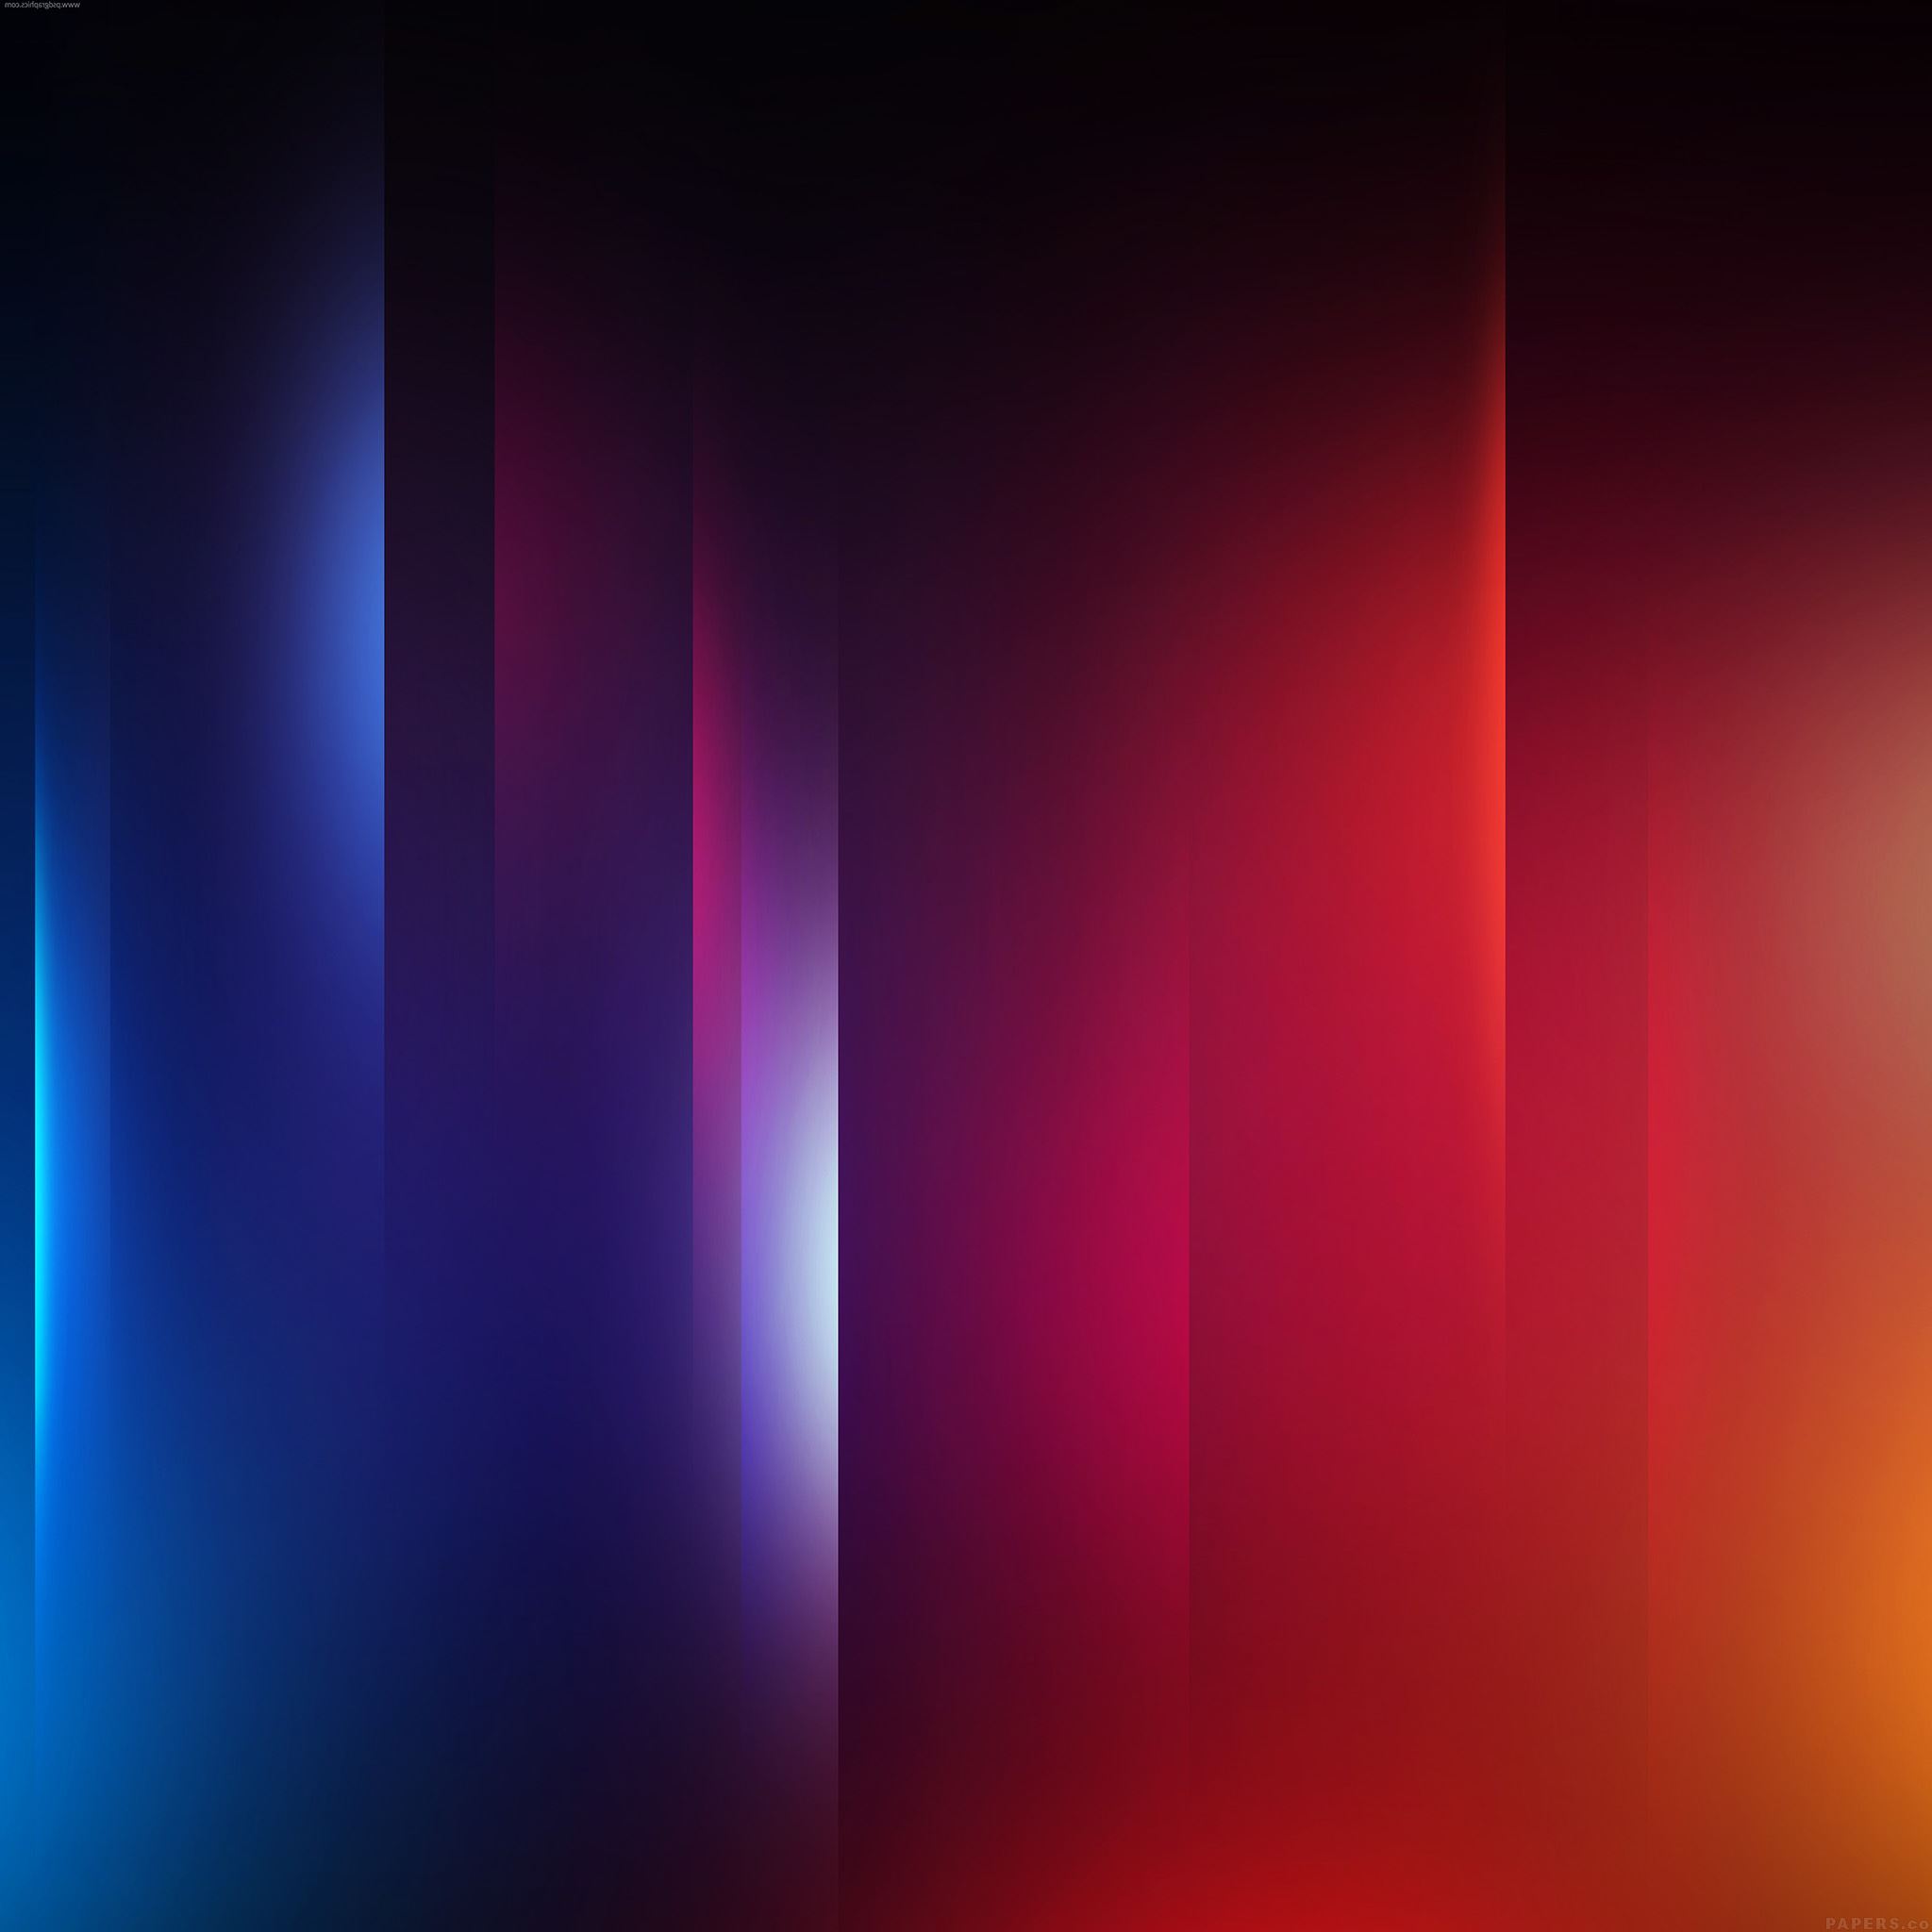 Colorful Vertical Lines Abstract Pattern Art iPad Air wallpaper 